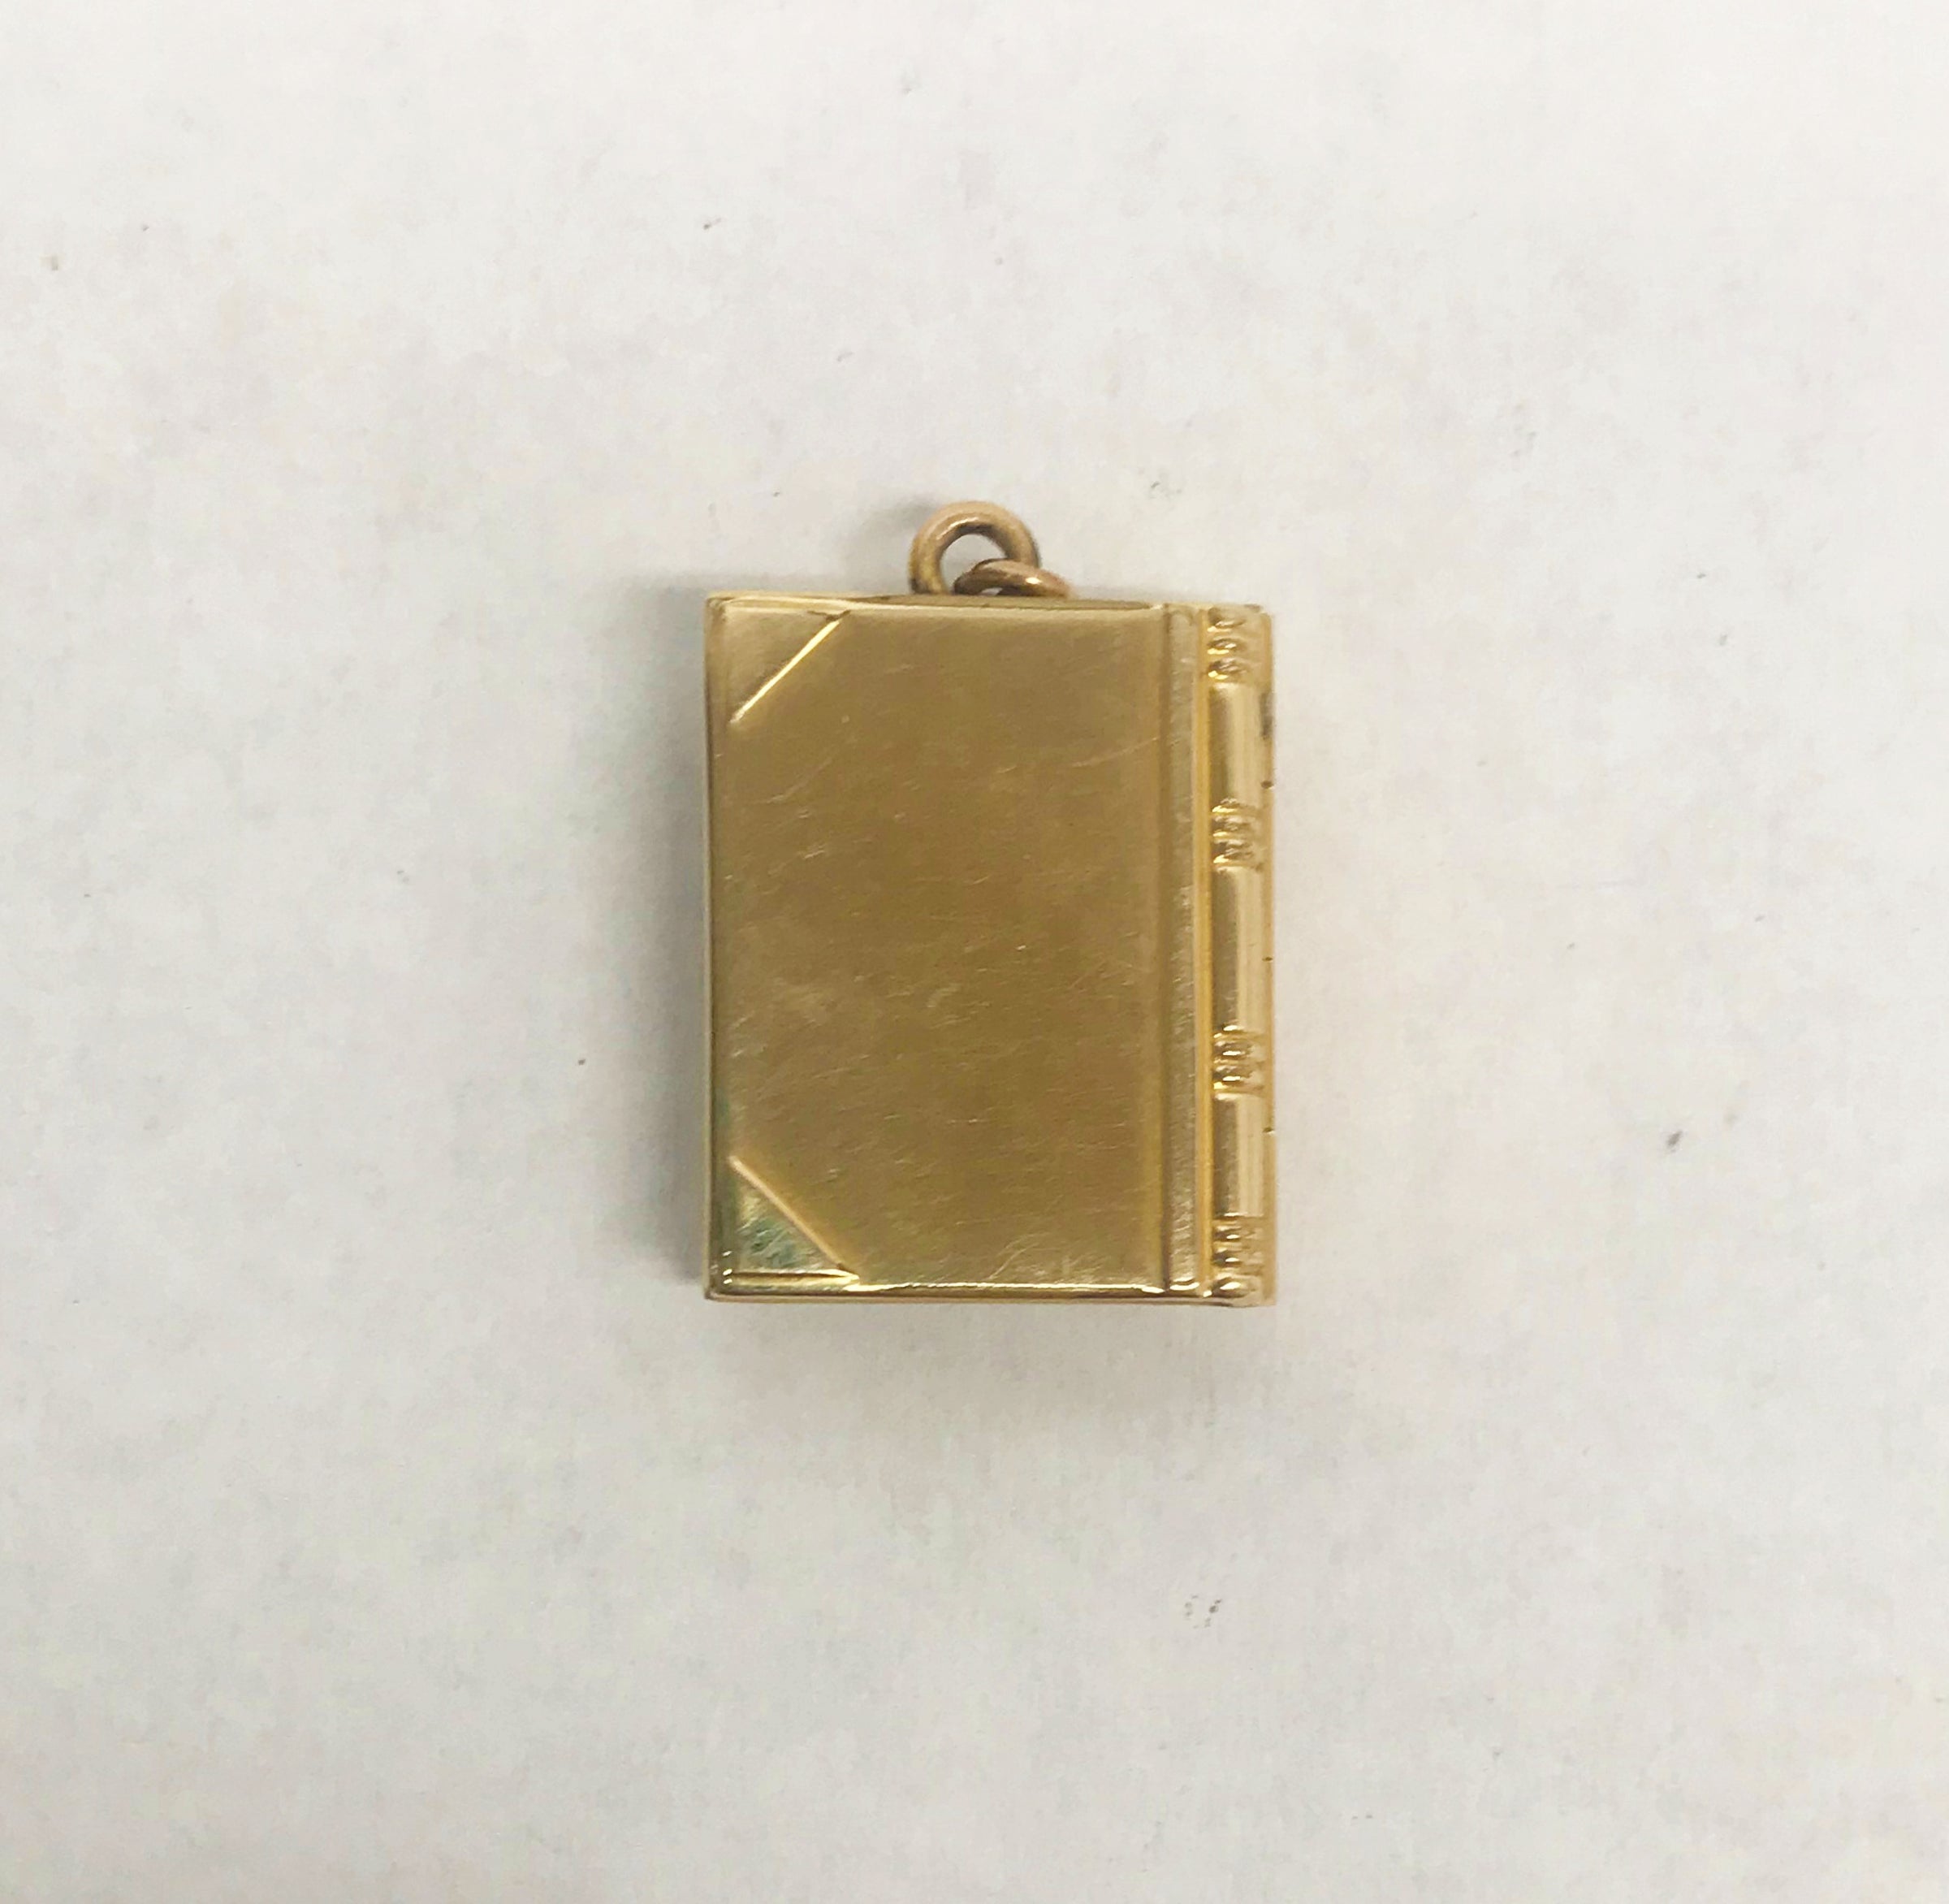 www.hersandhistreasures.com/products/1893-1950s-jmf-co-gold-filled-photo-locket-usa